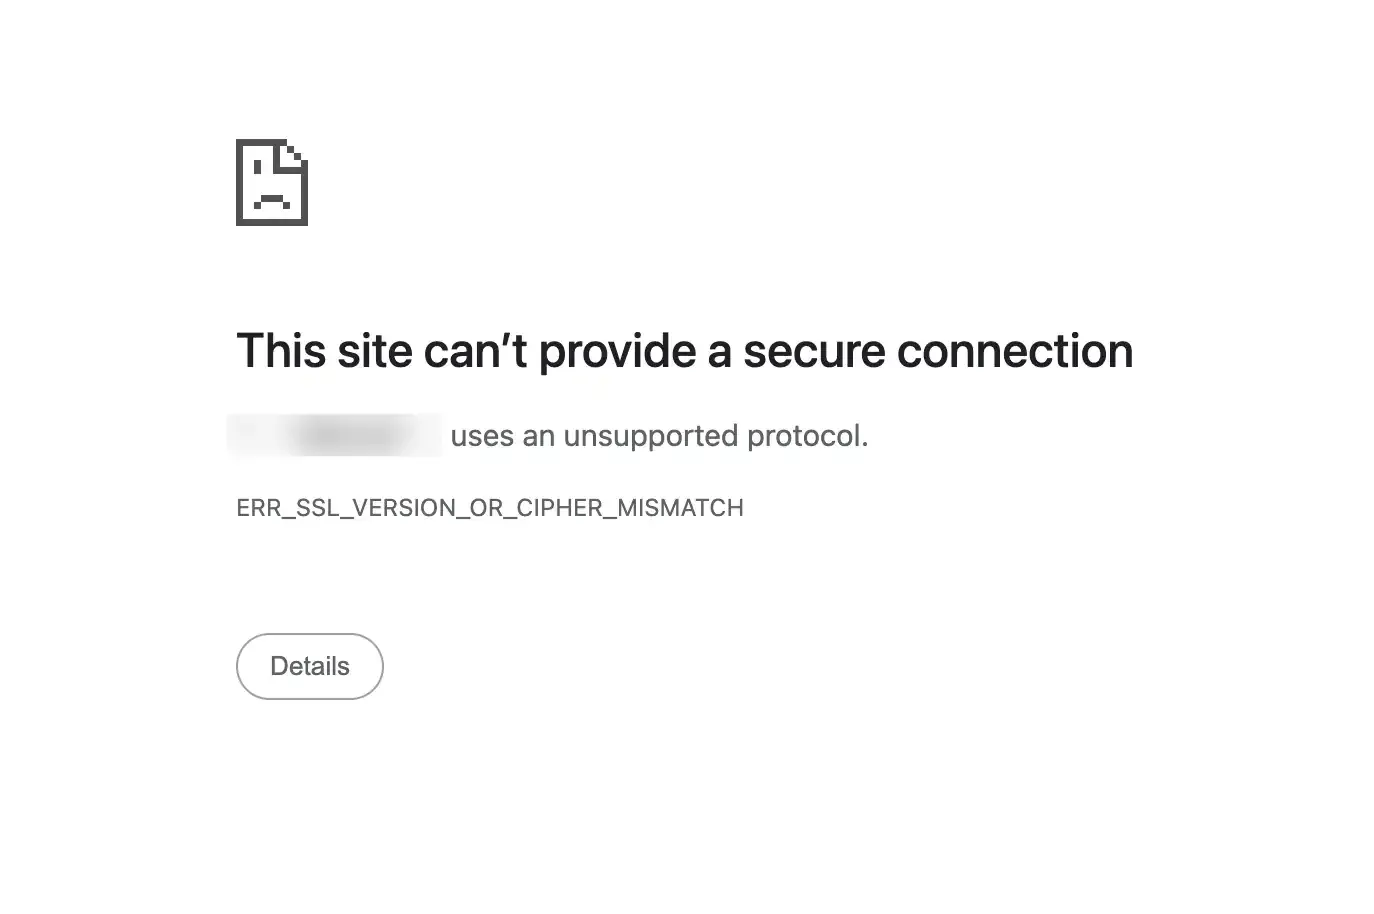 Error saying "This site can’t provide a secure connection"